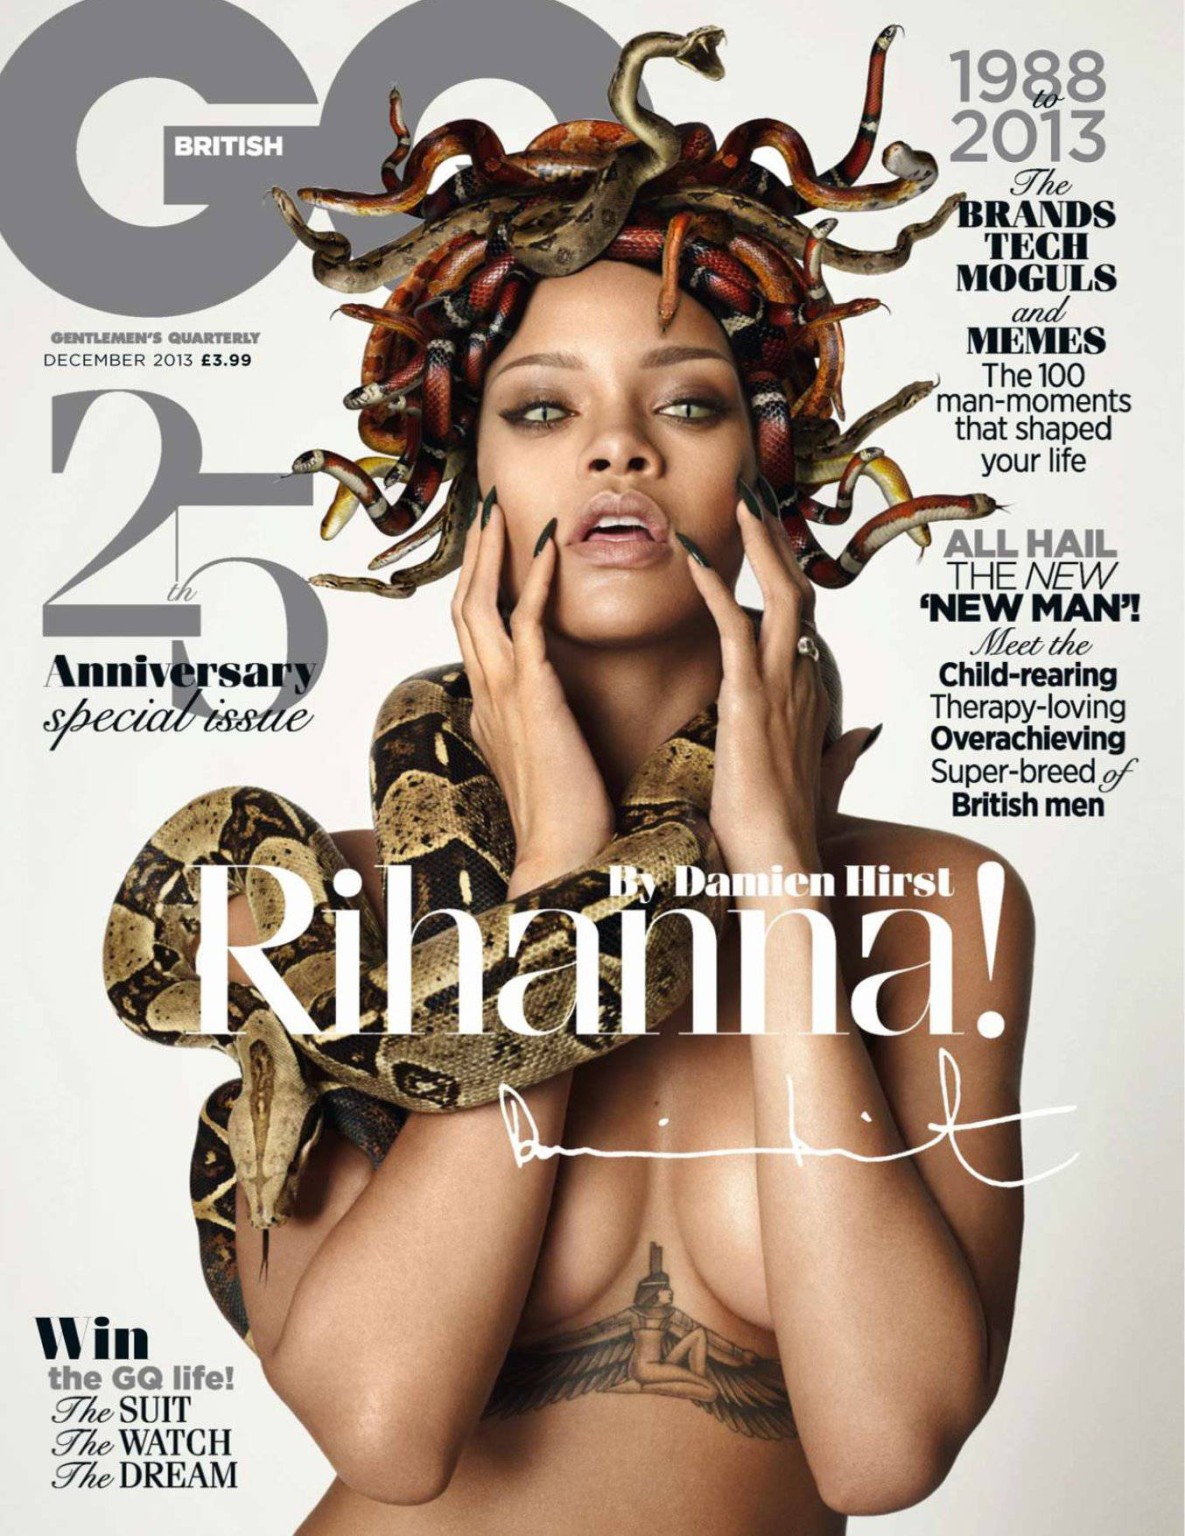 Rihanna fully nude but covered posing as the serpent-haired queen Medusa for the #75214045